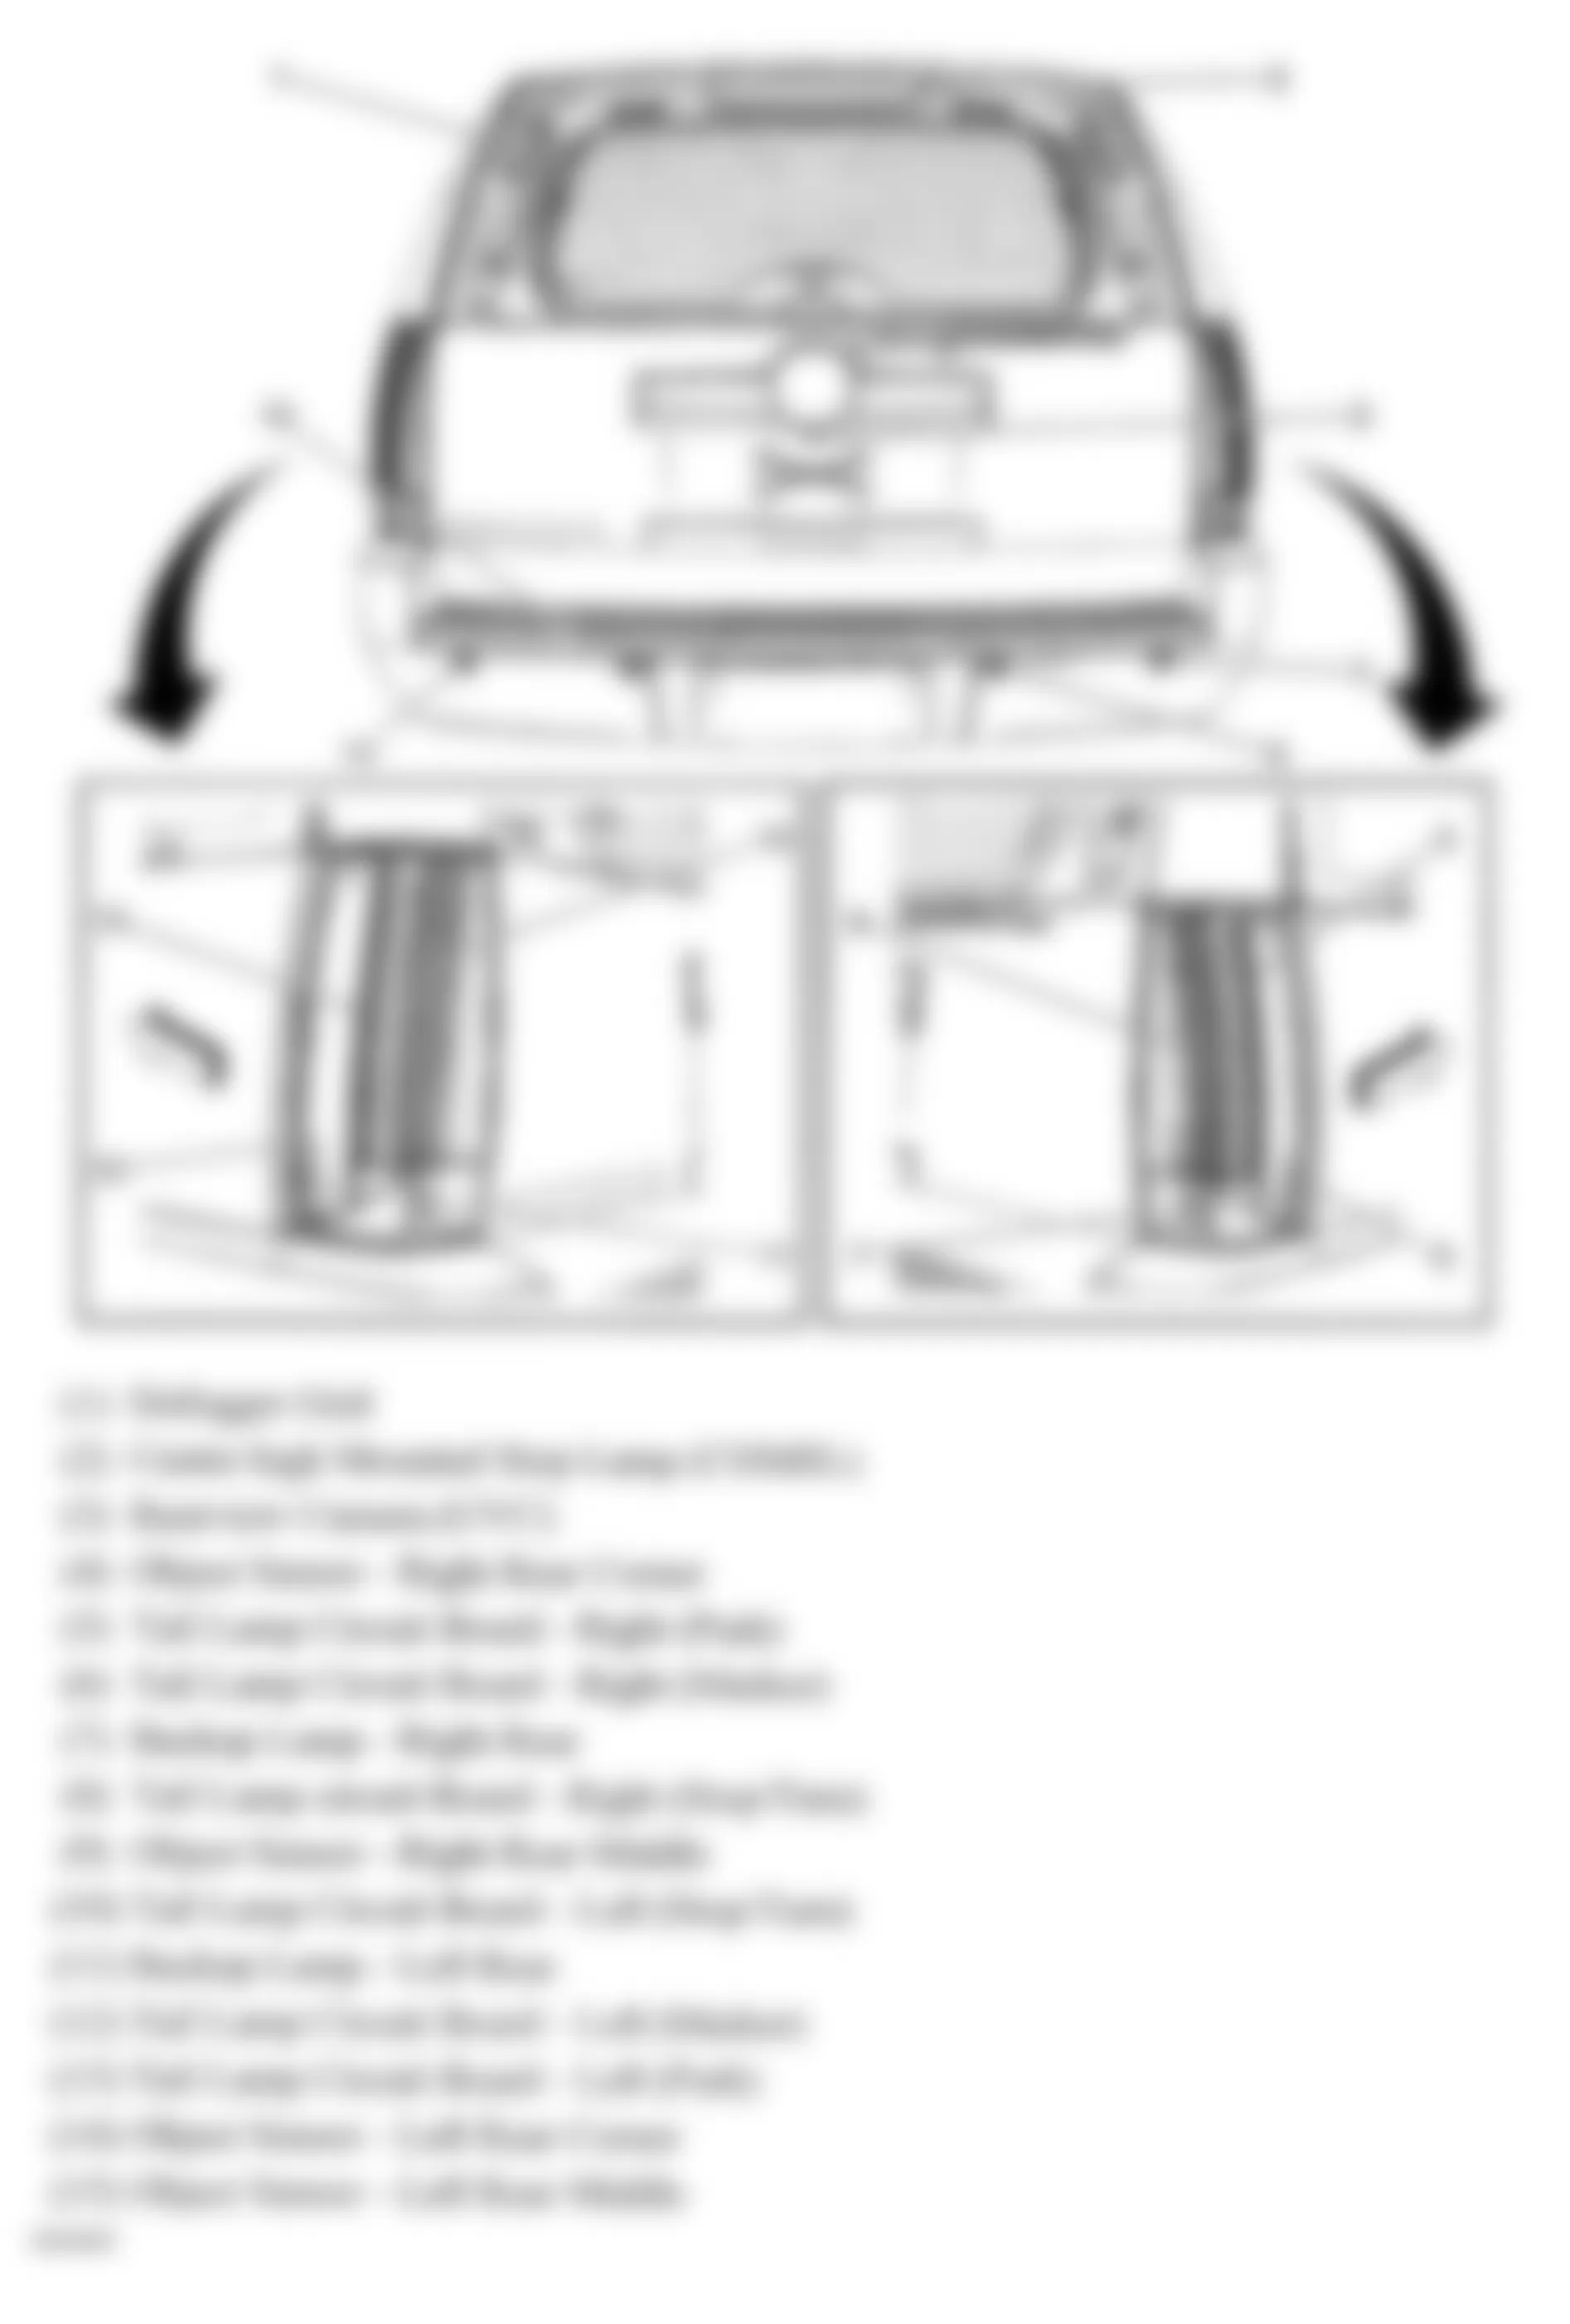 Chevrolet Suburban K1500 2009 - Component Locations -  Rear Of Vehicle (Tahoe & Escalade W/One Piece Liftgate)